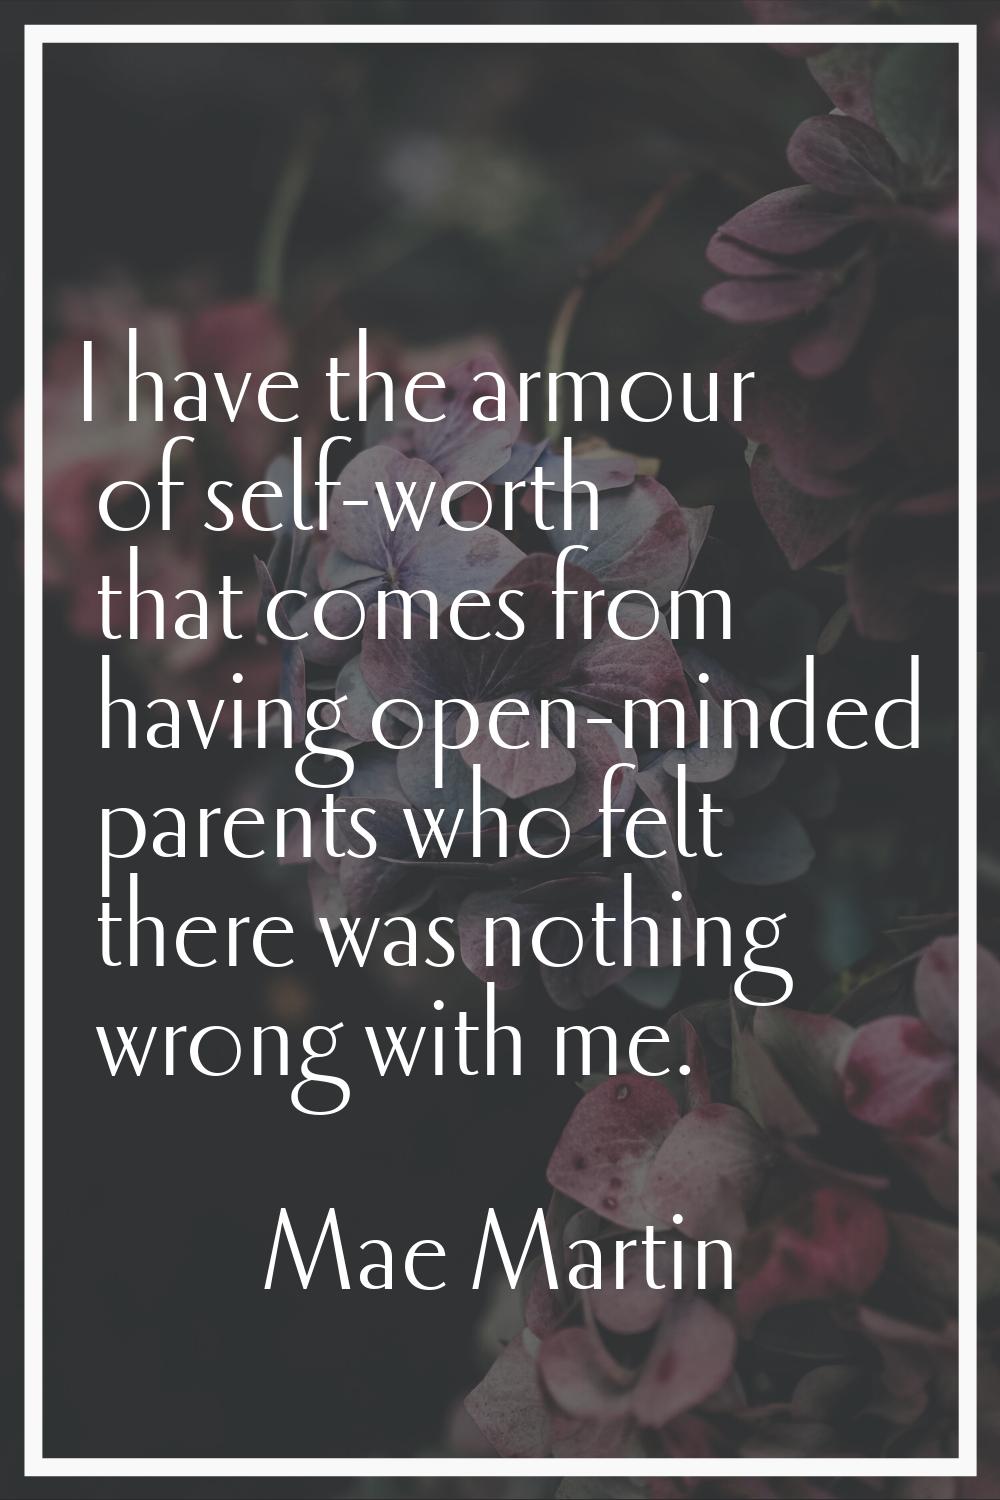 I have the armour of self-worth that comes from having open-minded parents who felt there was nothi